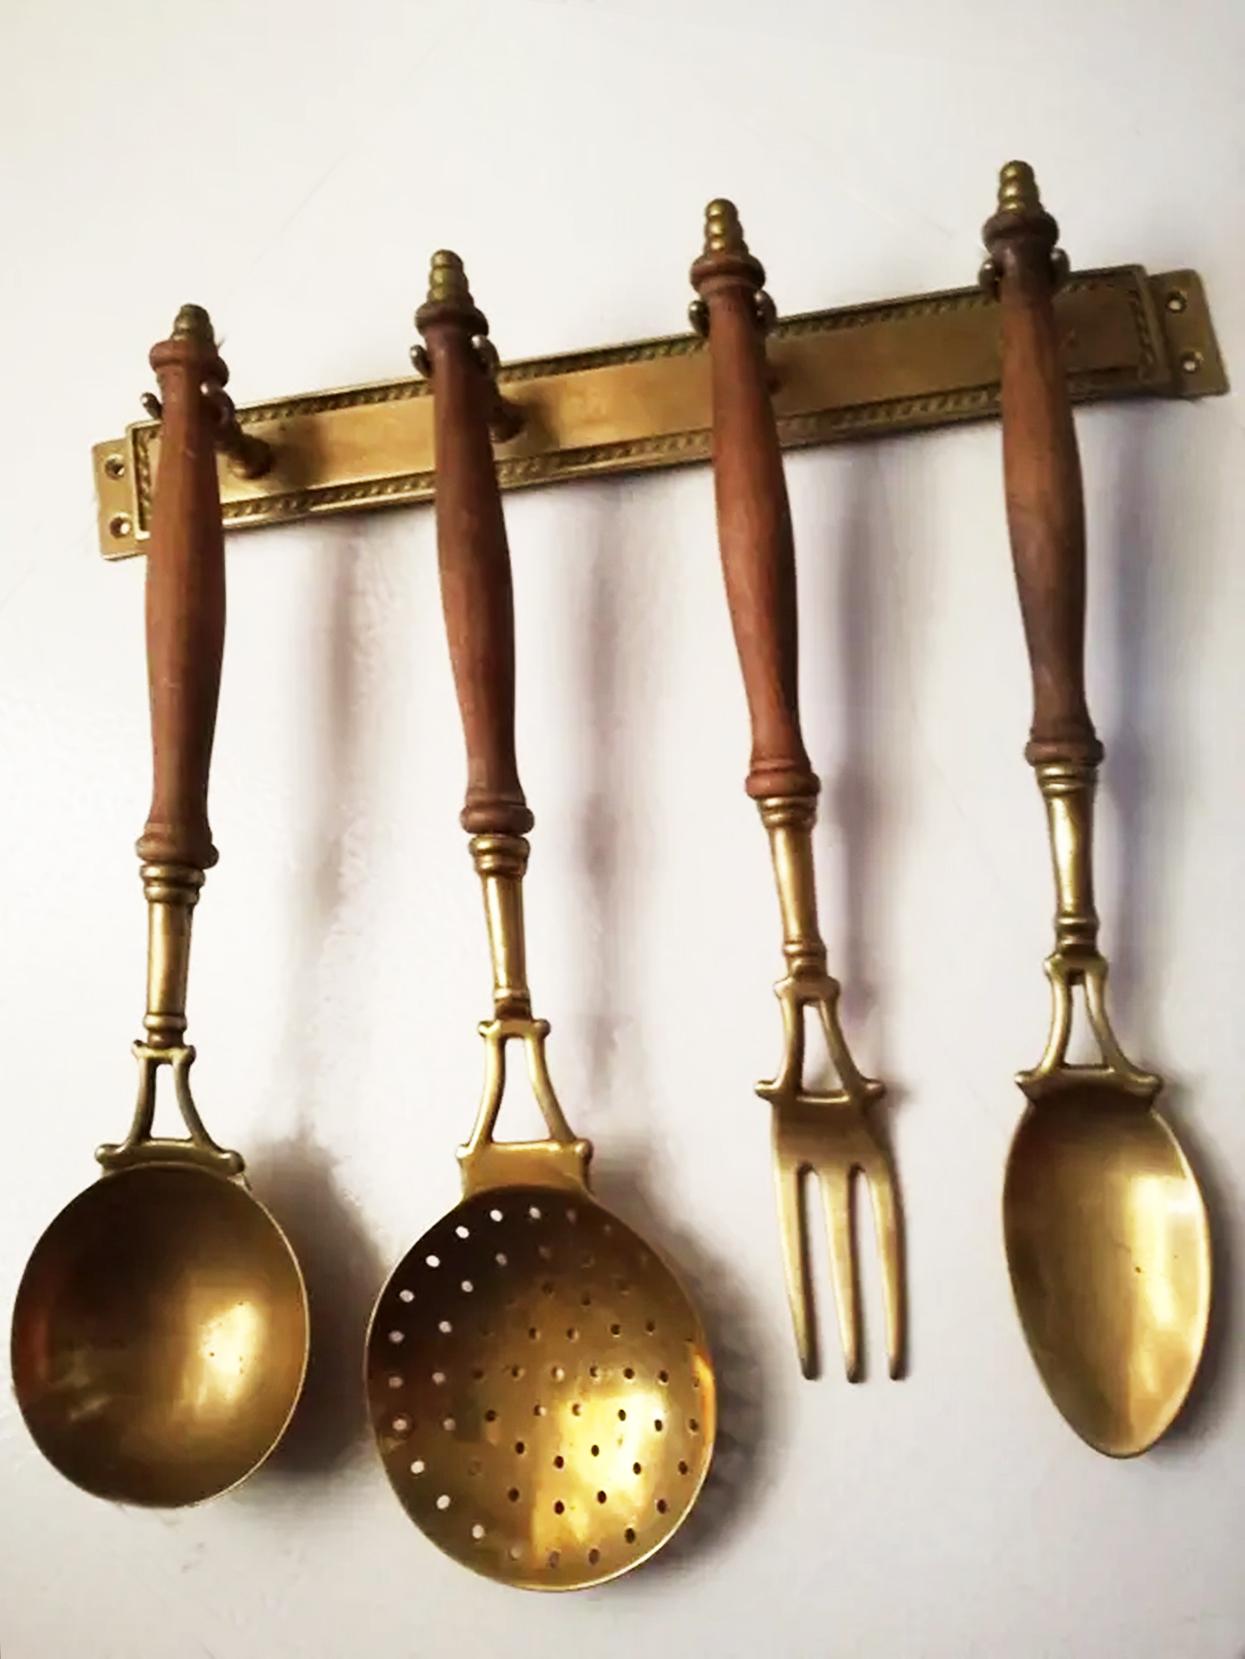 Old Kitchen Utensils Made of Brass with from a Hanging Bar, Early 20th Century 4